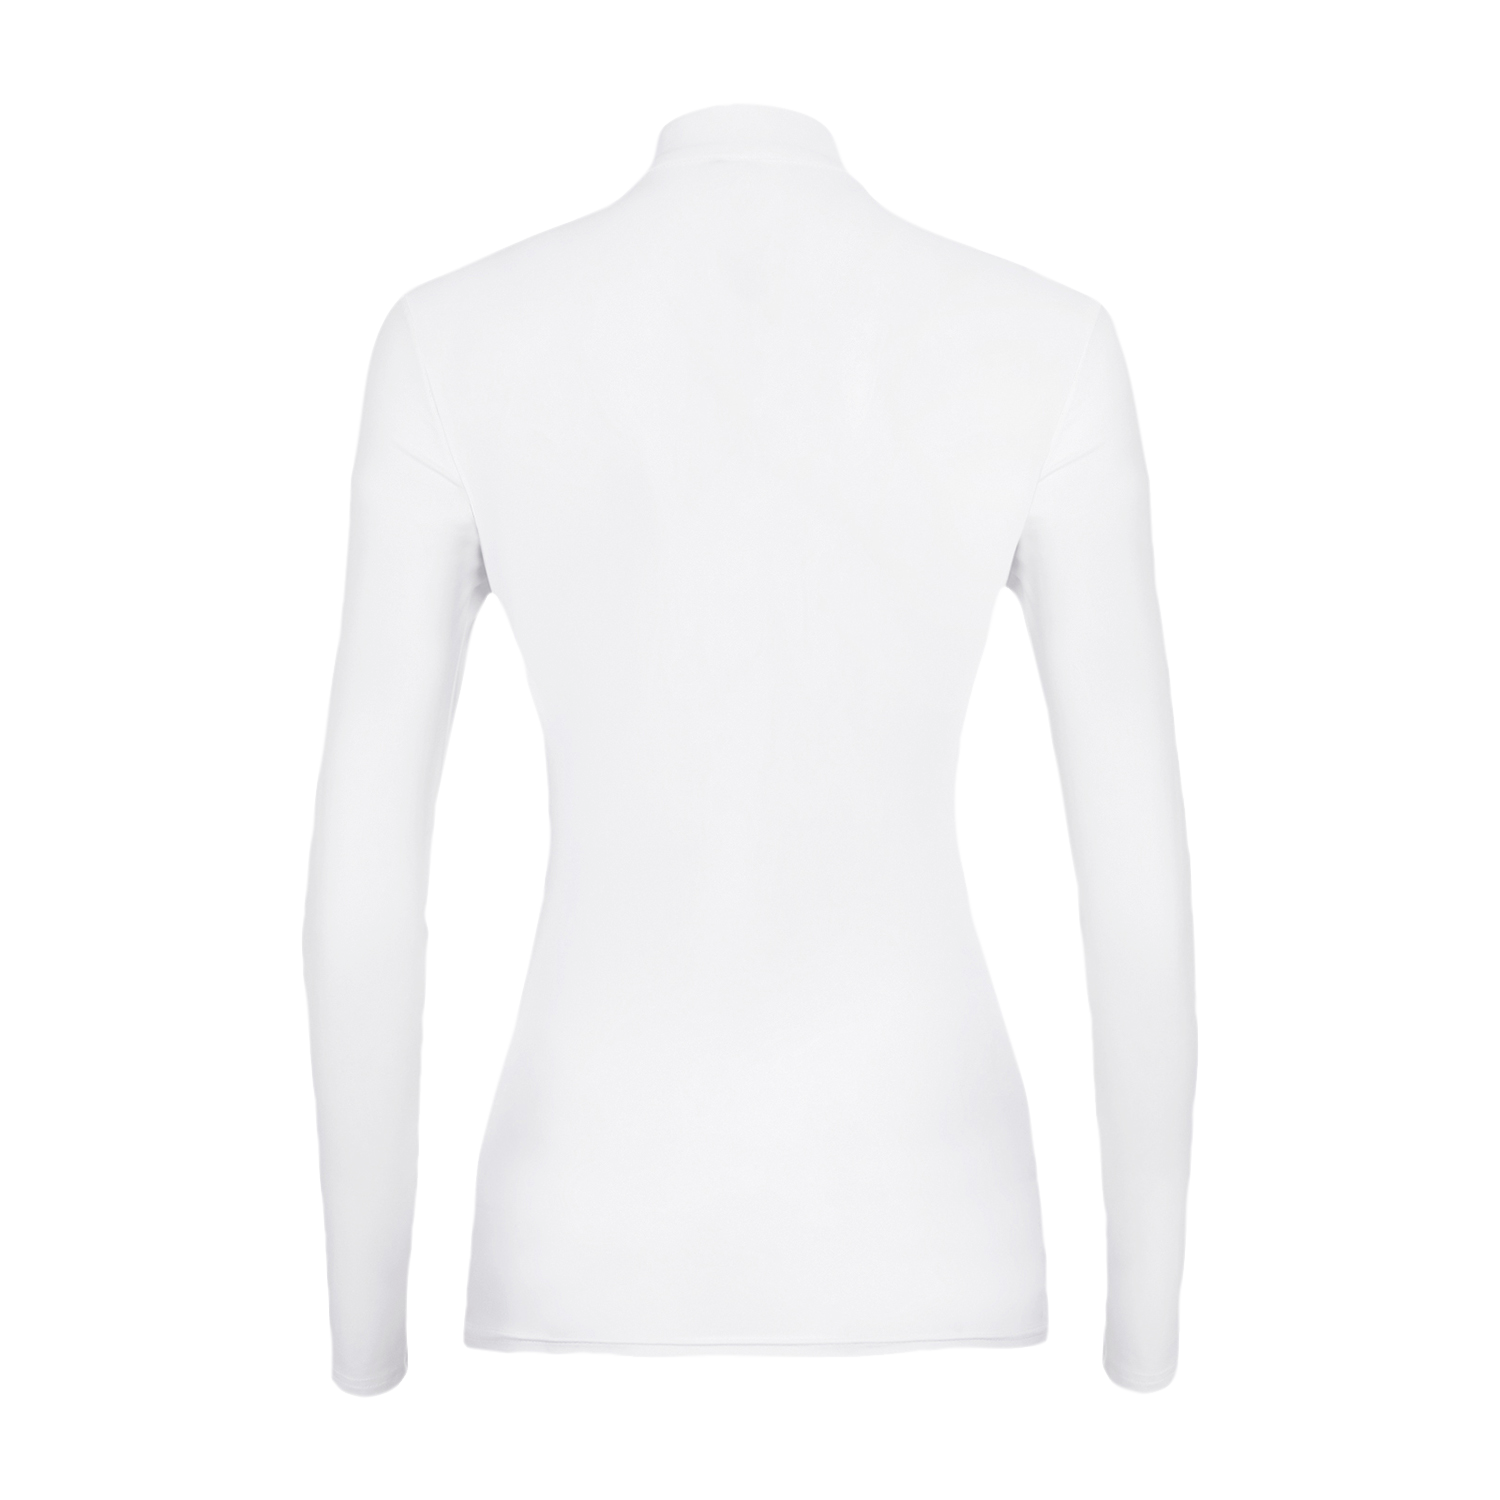 The Vivian Graffic Laguso long sleeve show shirt is perfect for any discipline. The Show shirt has a sporty yet elegant look.  The shirt is made from breathable luxury but stretch jersey, a graduated Graffic print to the front with a zip and cover front opening.    Machine washable at 30’